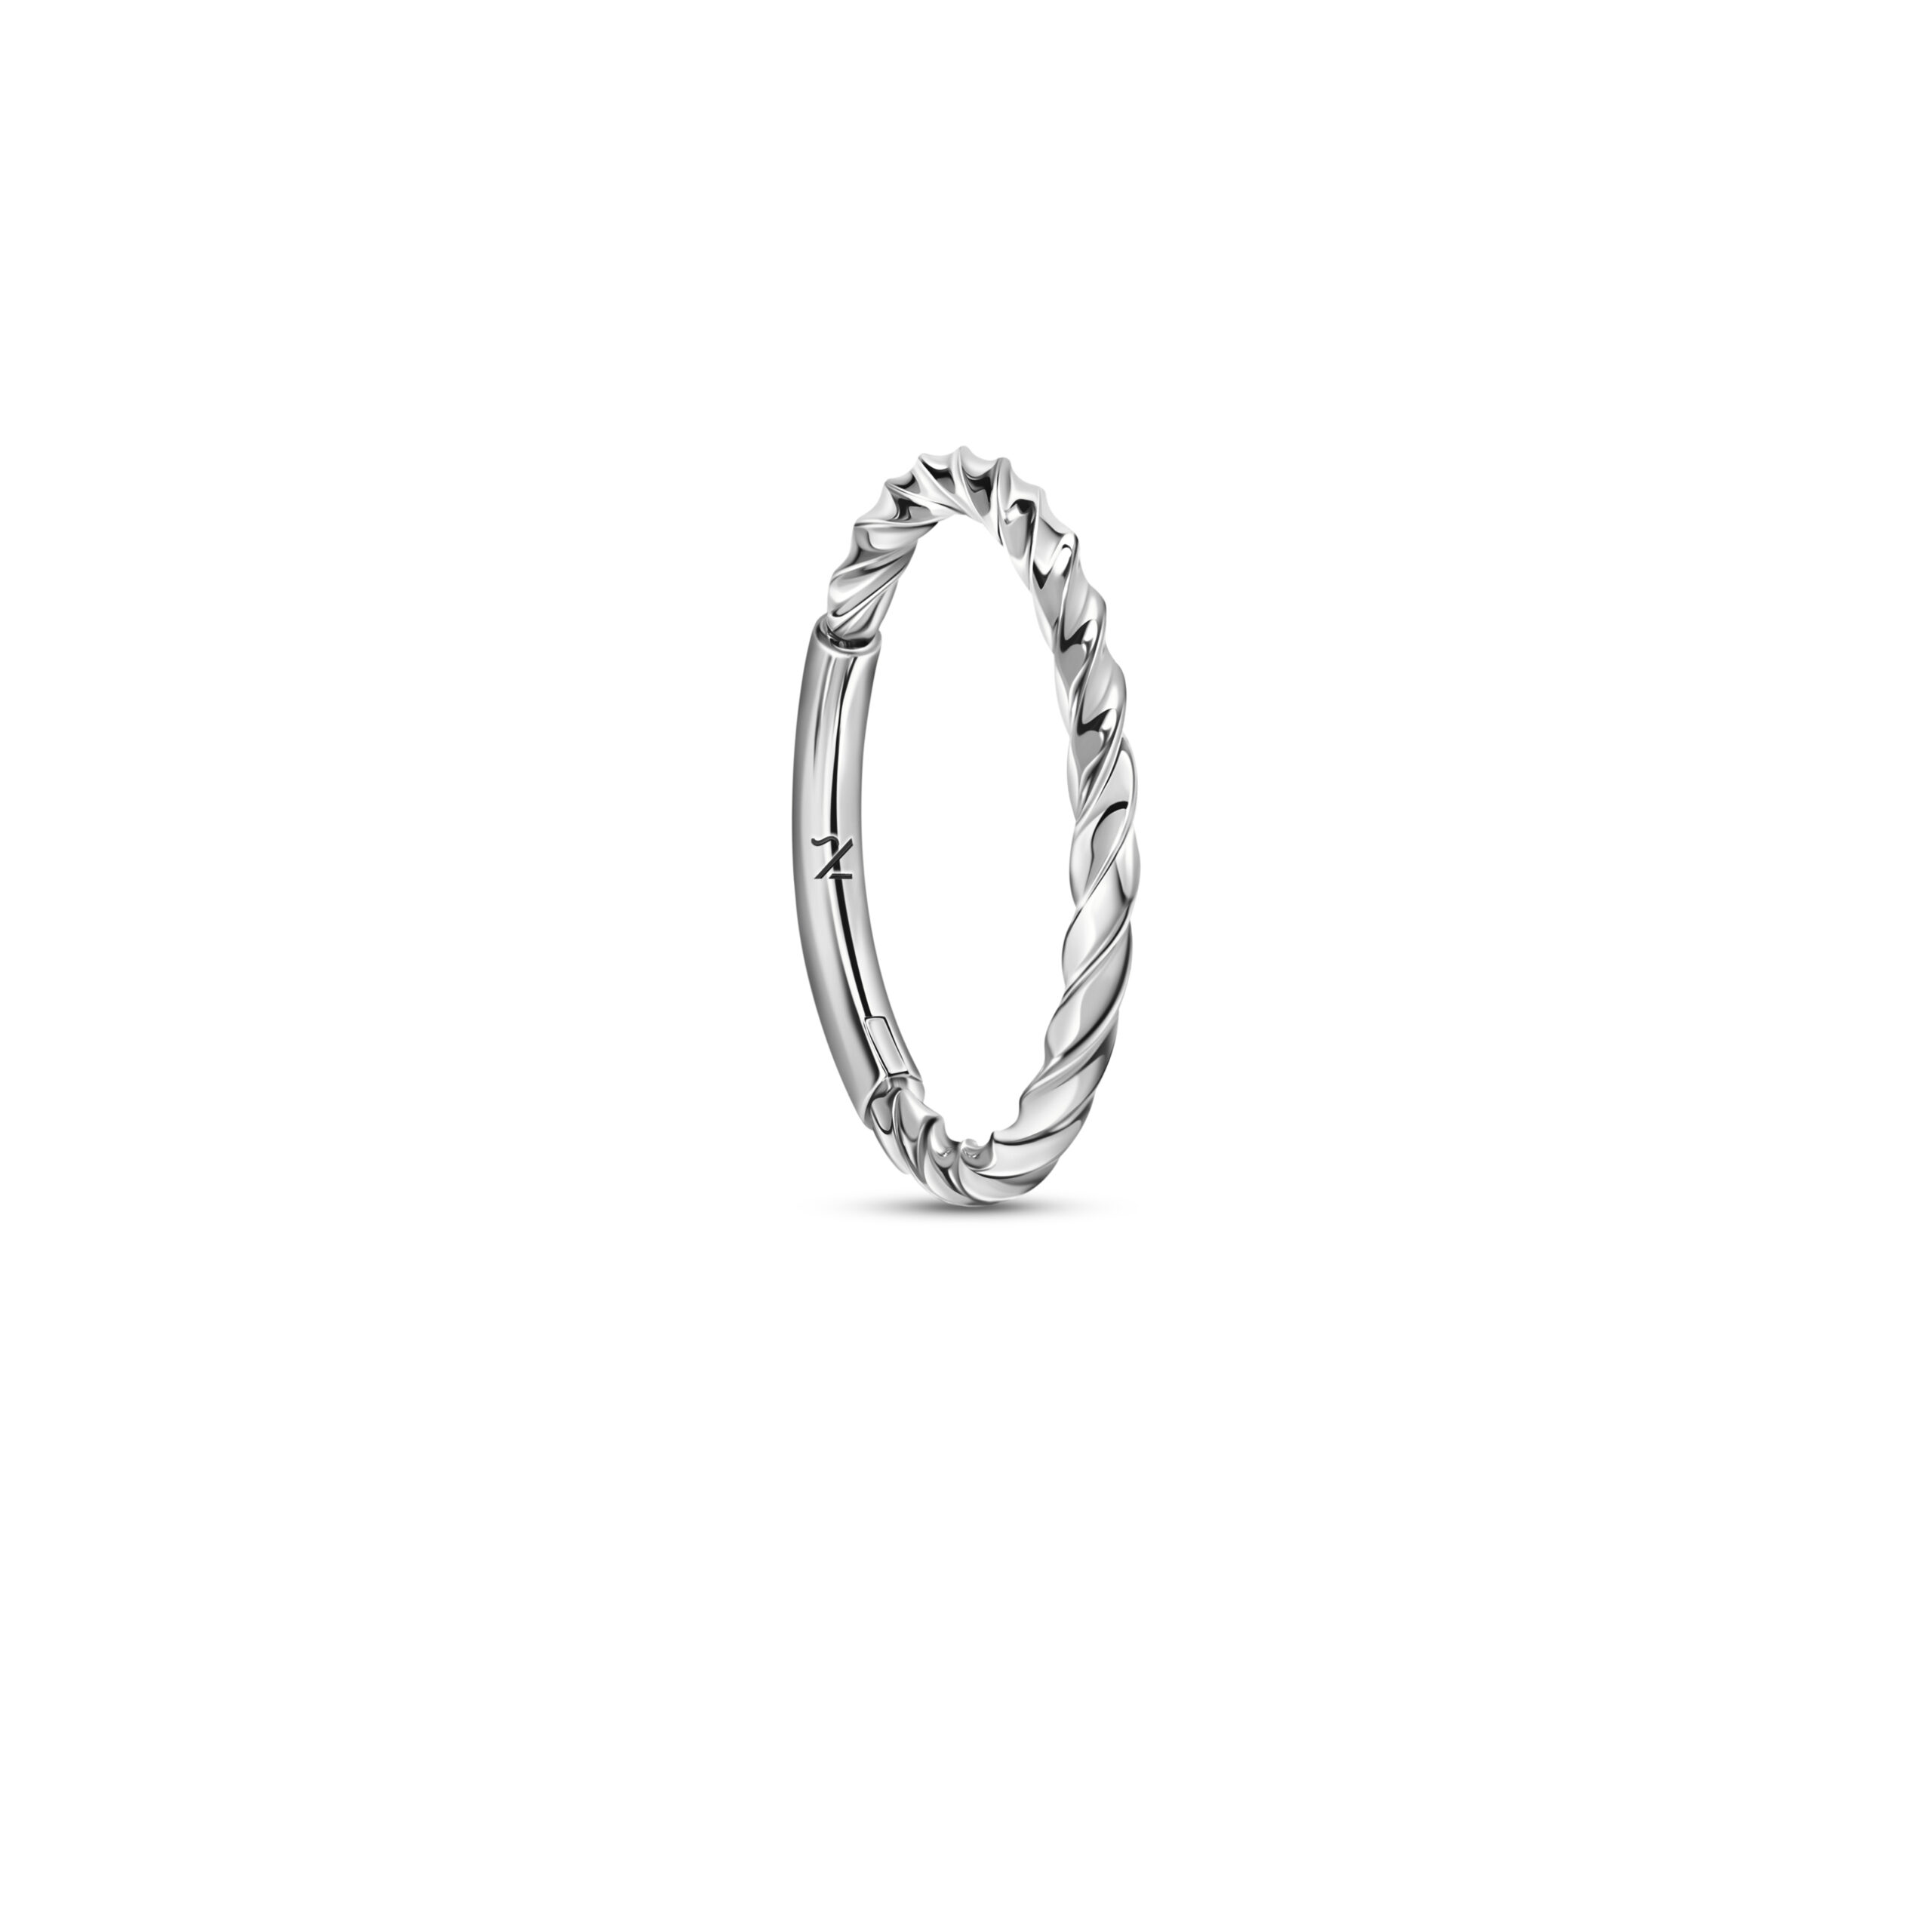 10mm Twisted Ring White Gold